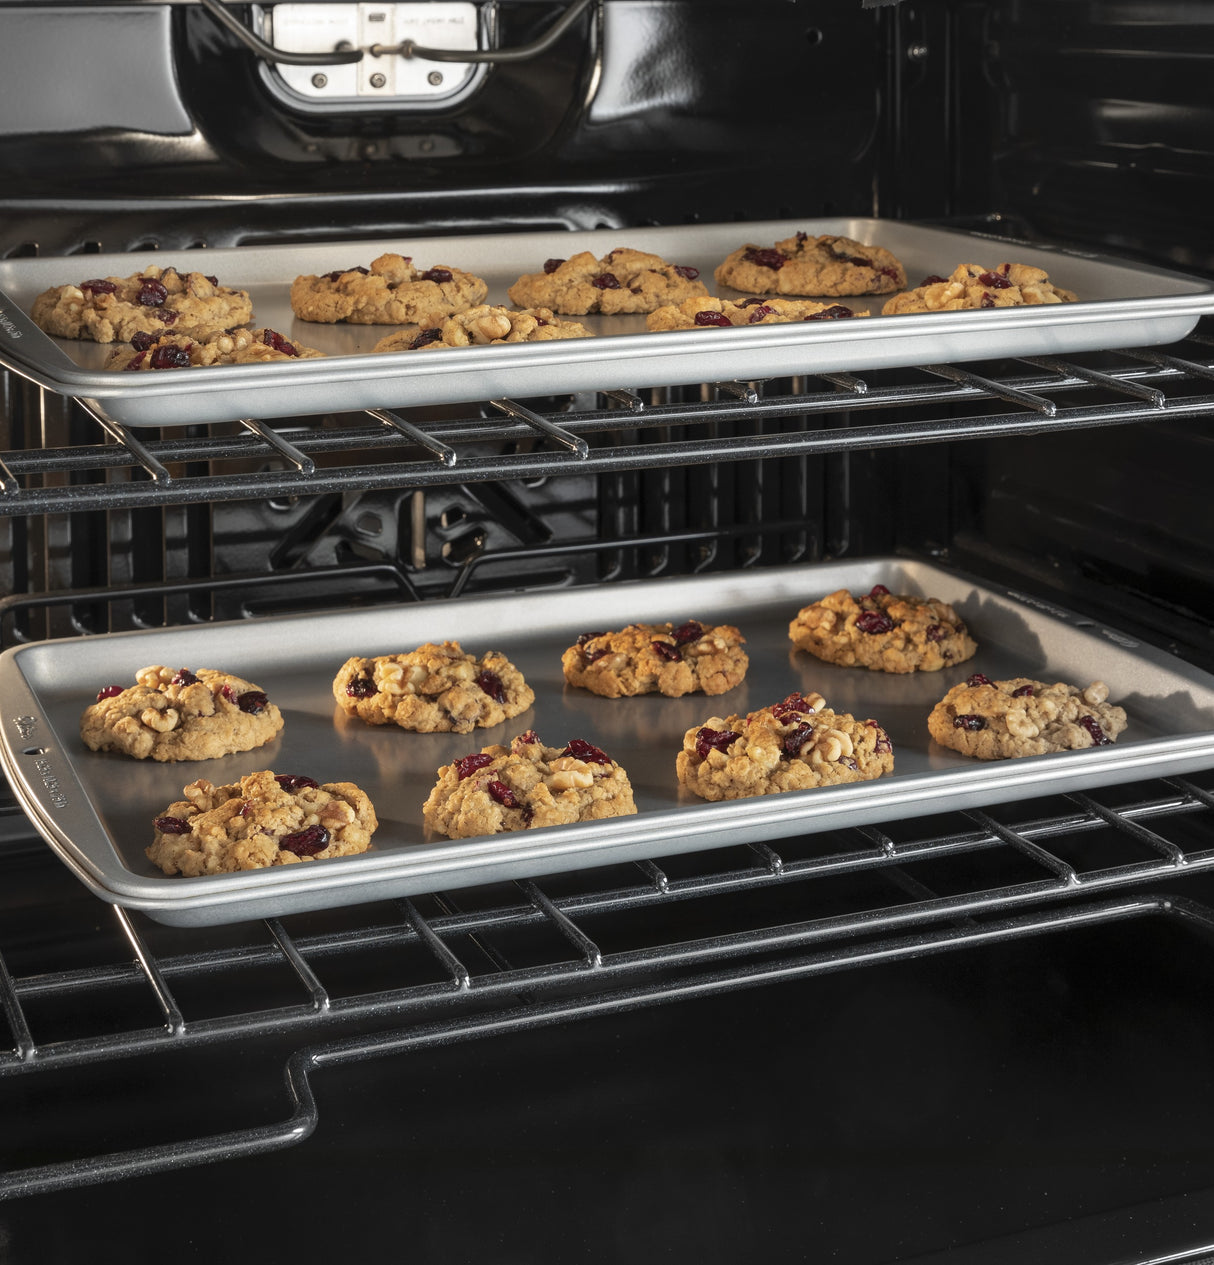 GE(R) 30" Smart Built-In Self-Clean Double Wall Oven with Never-Scrub Racks - (JTD3000DNWW)